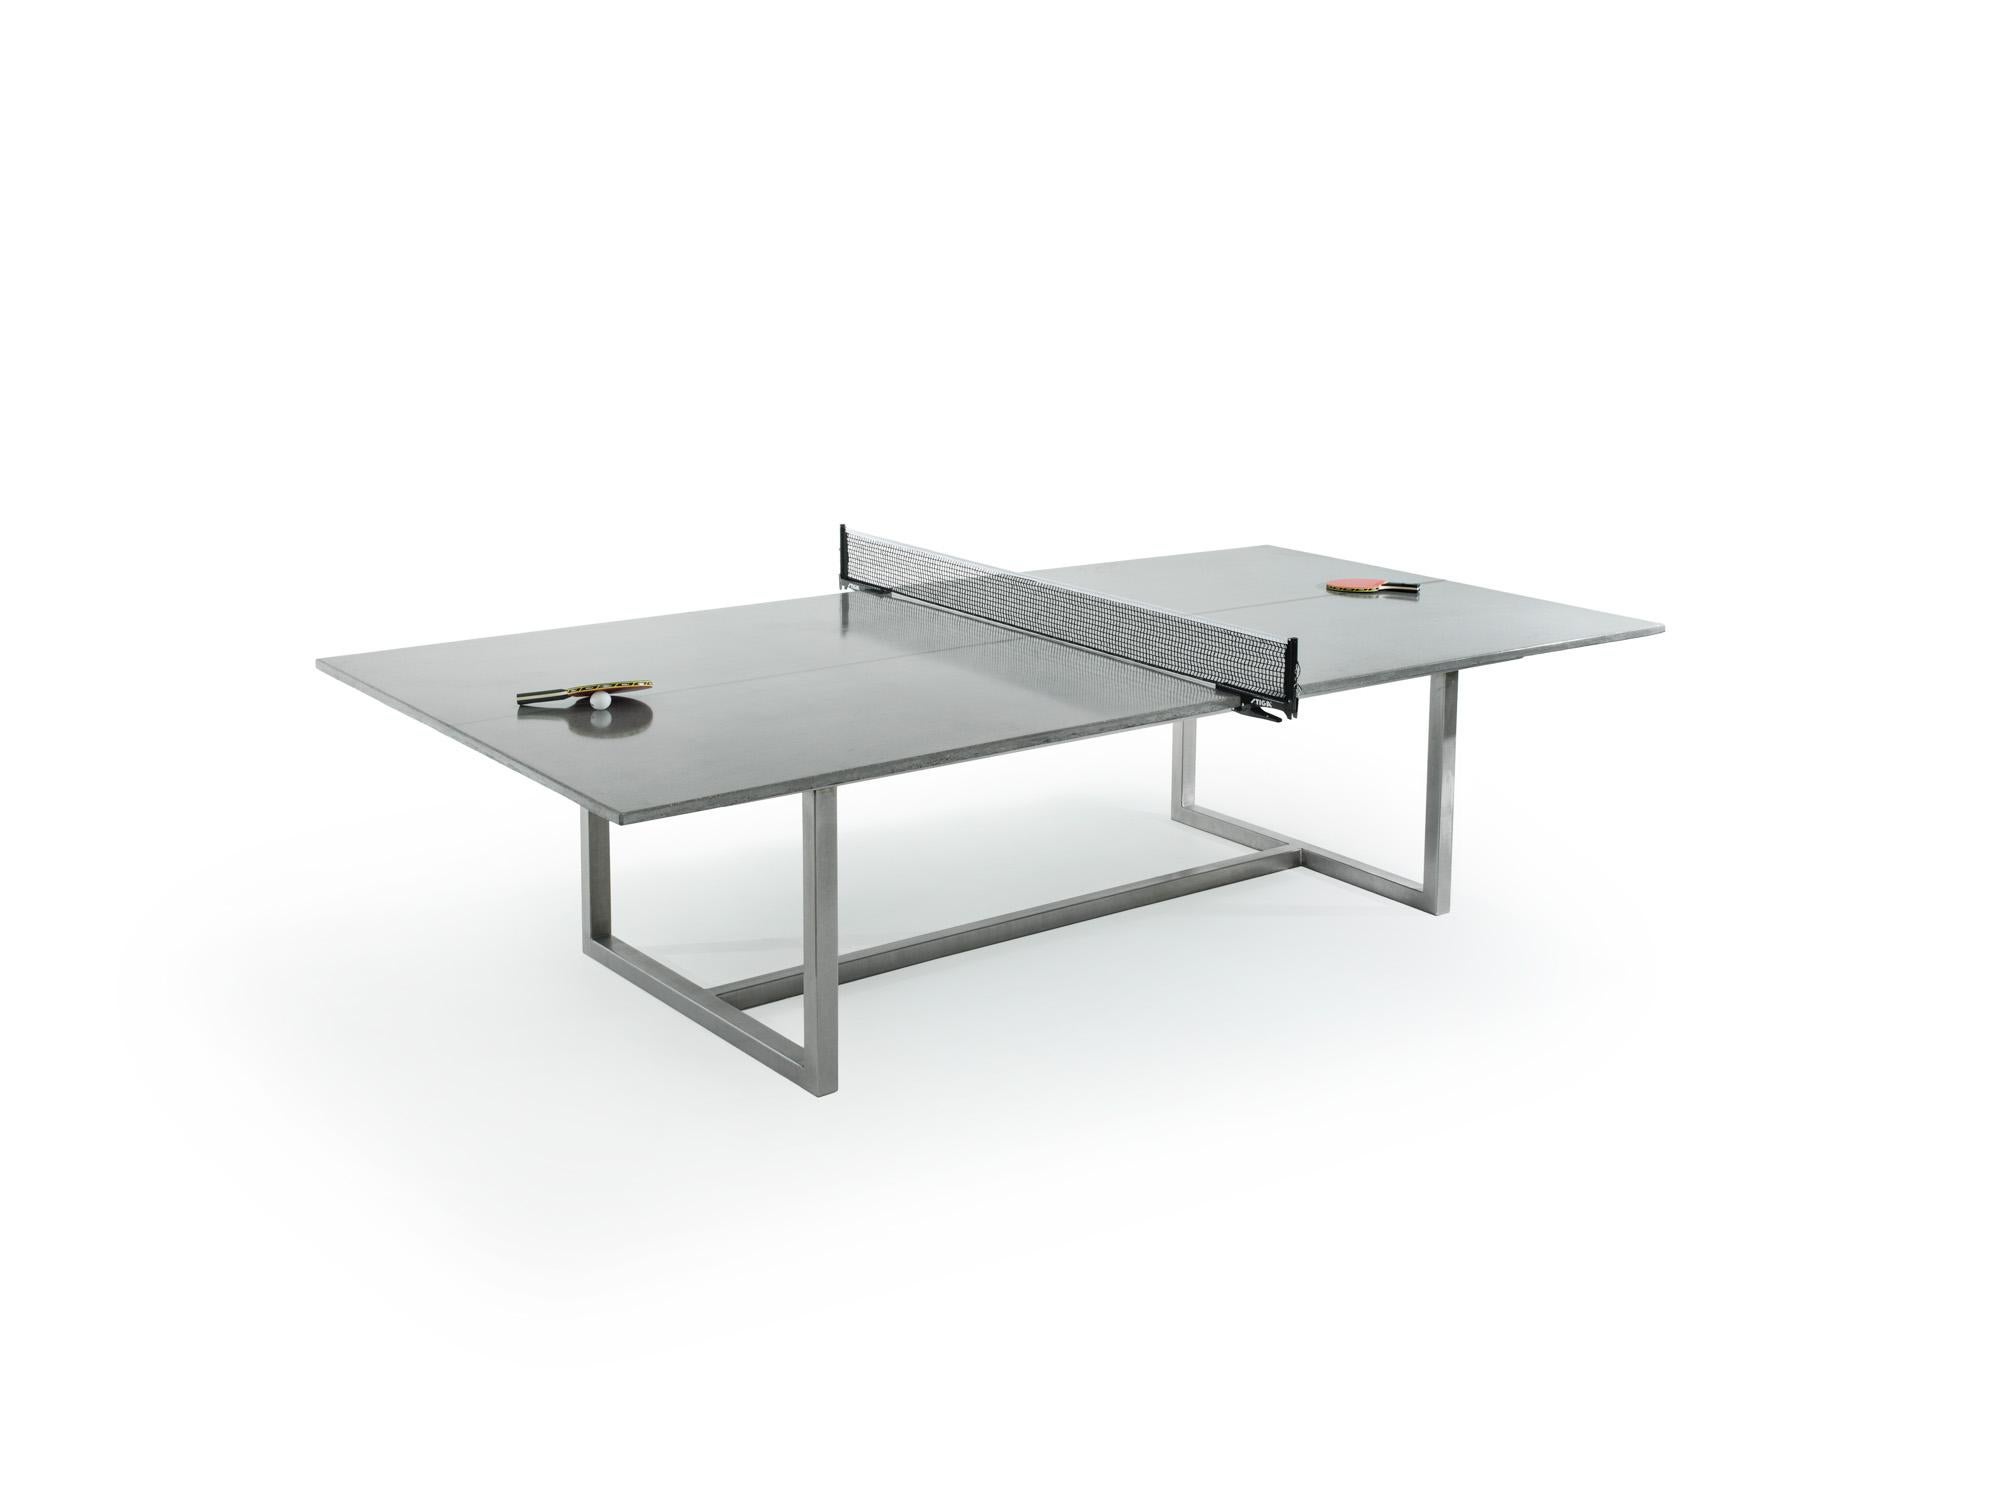 james dewulf ping pong table